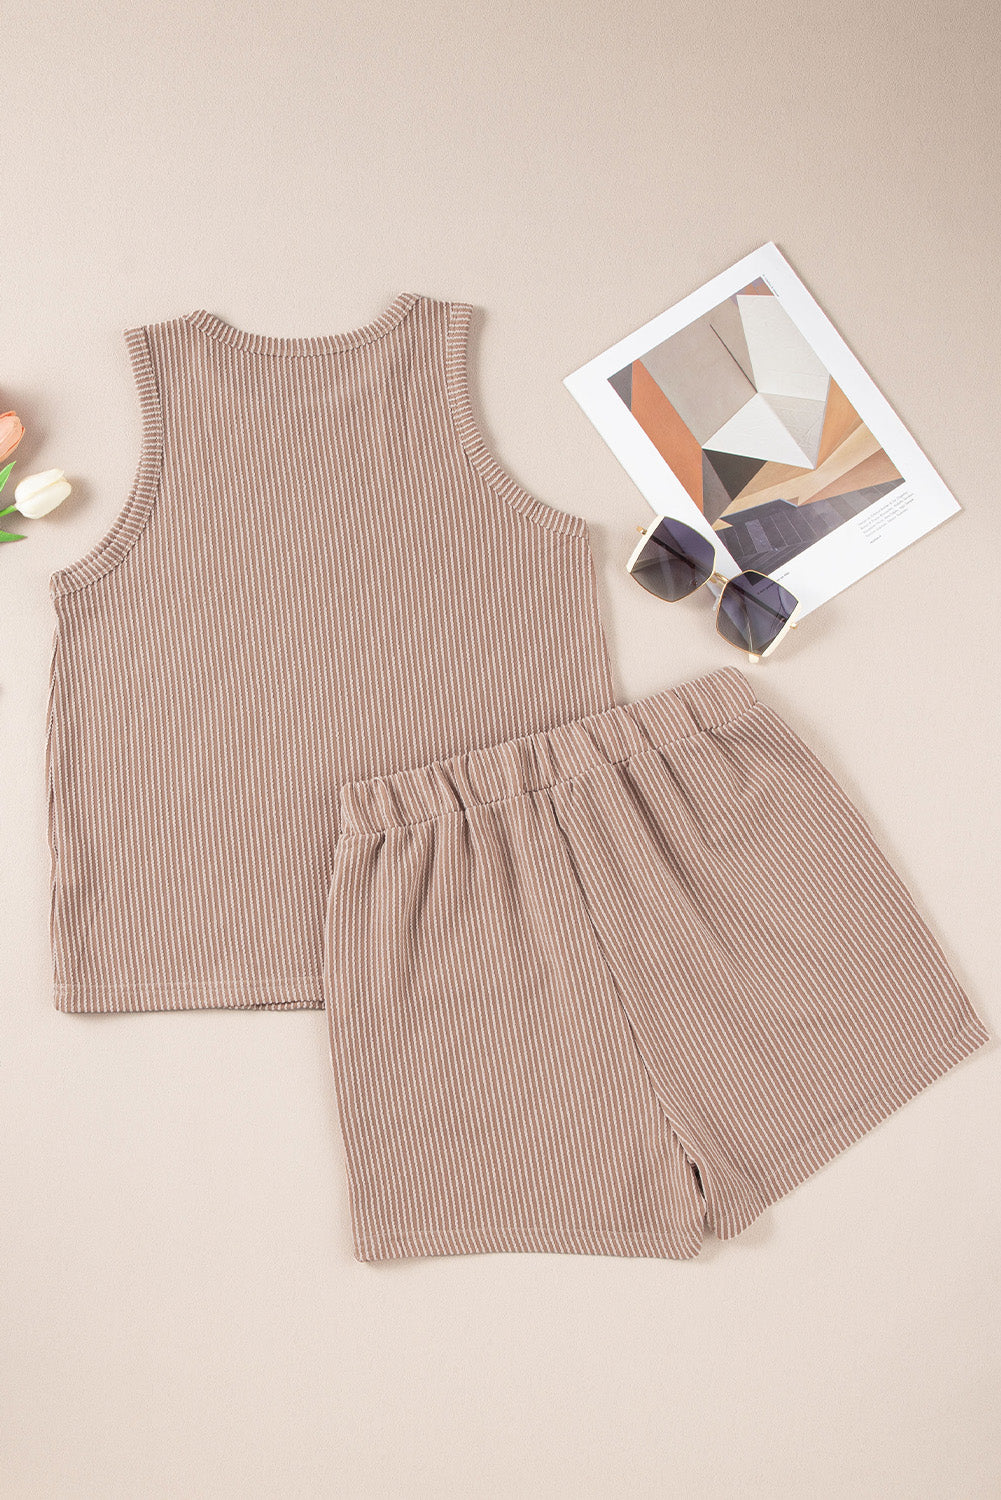 Textured Round Neck Tank and Shorts Set